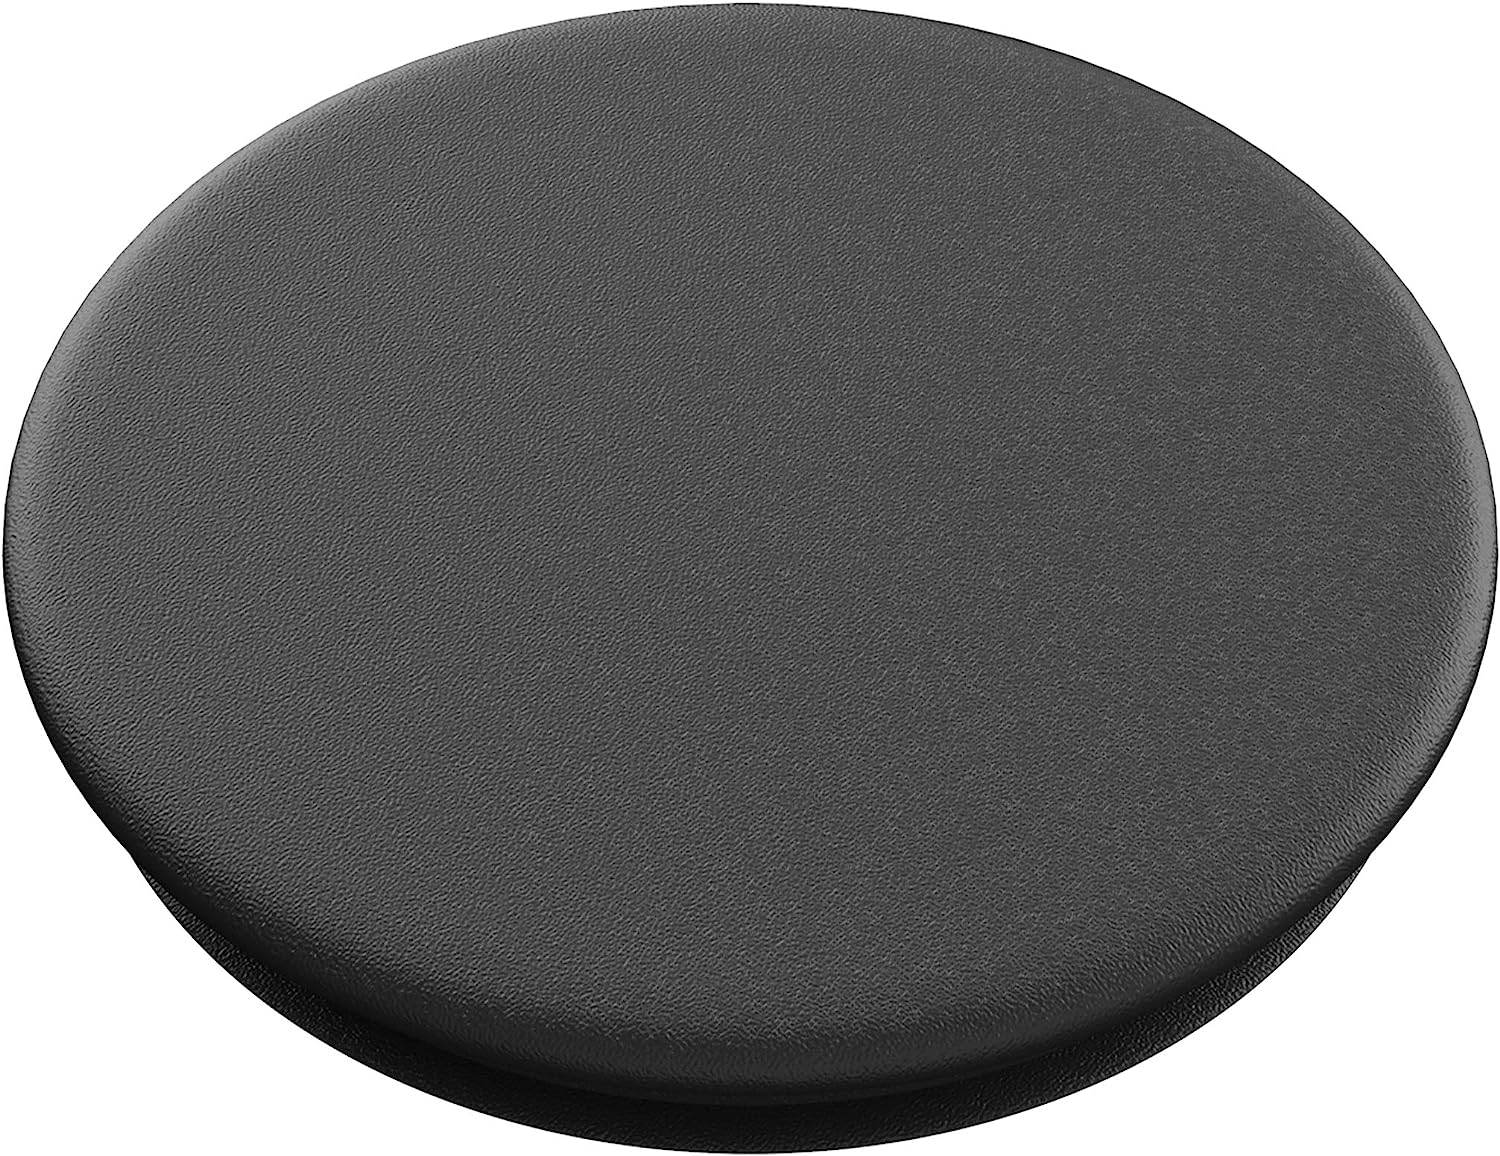 PopSockets Adhesive Phone Grip with Expandable Kickstand and swappable top - PopGrip Black - image 3 of 5